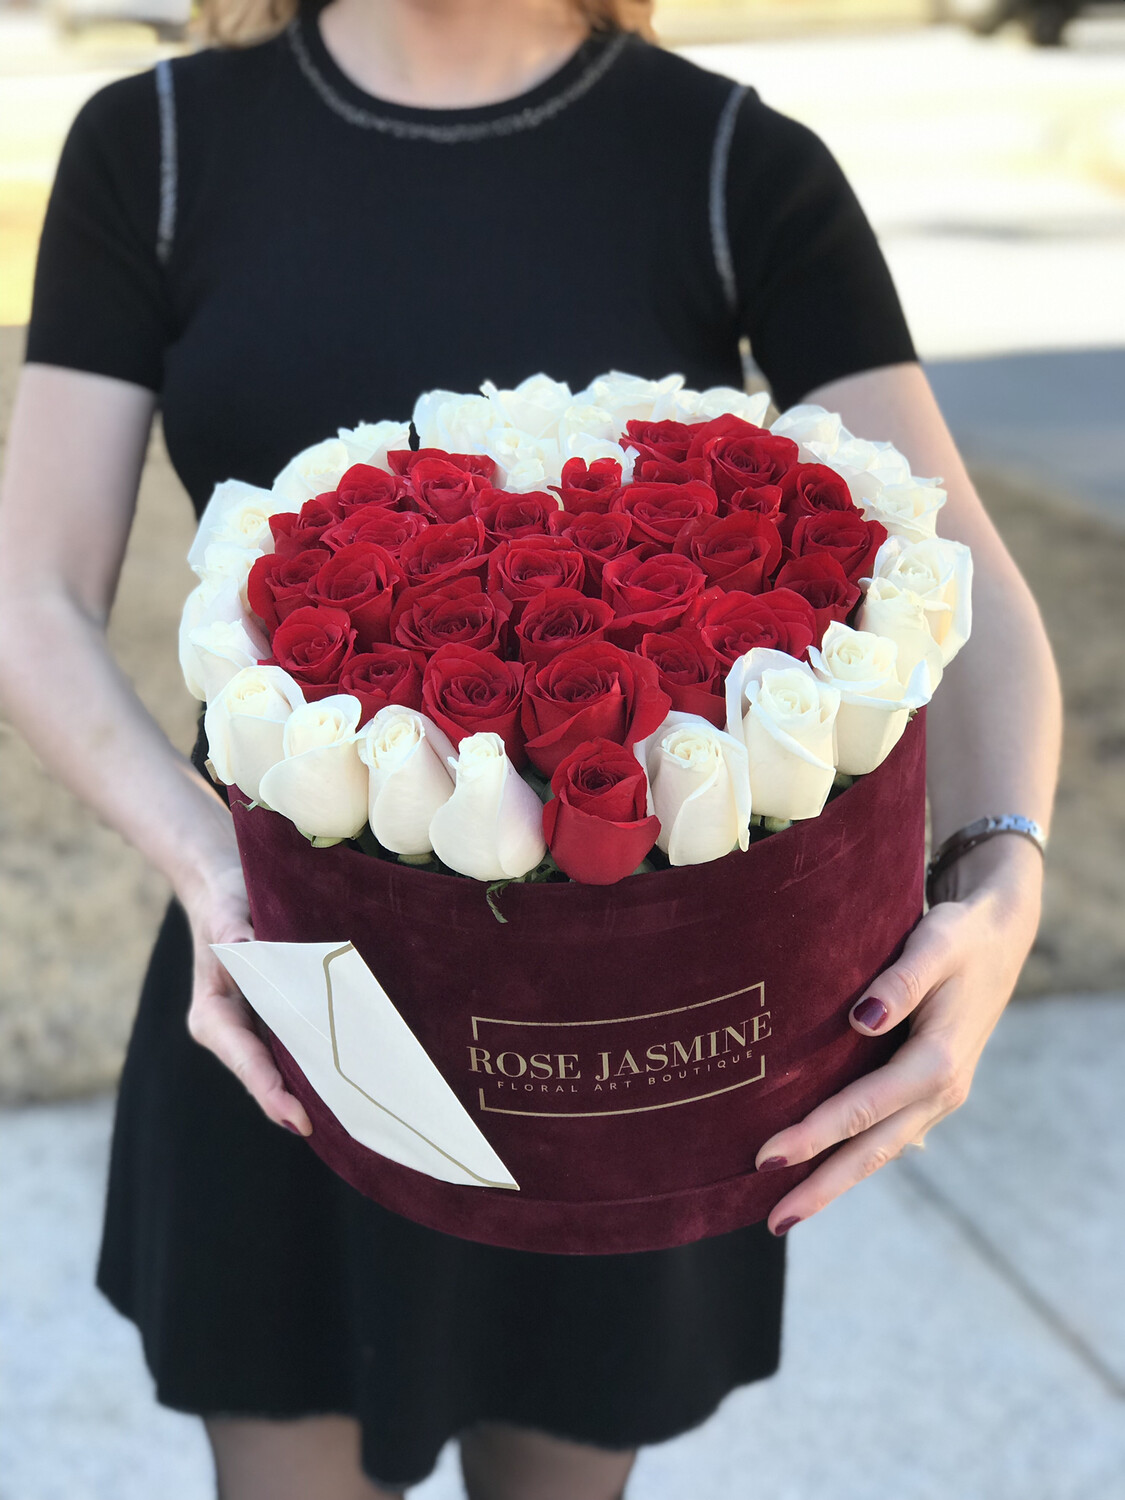 Love is in the air (Up To 4 Dozen Fresh Cut Roses)